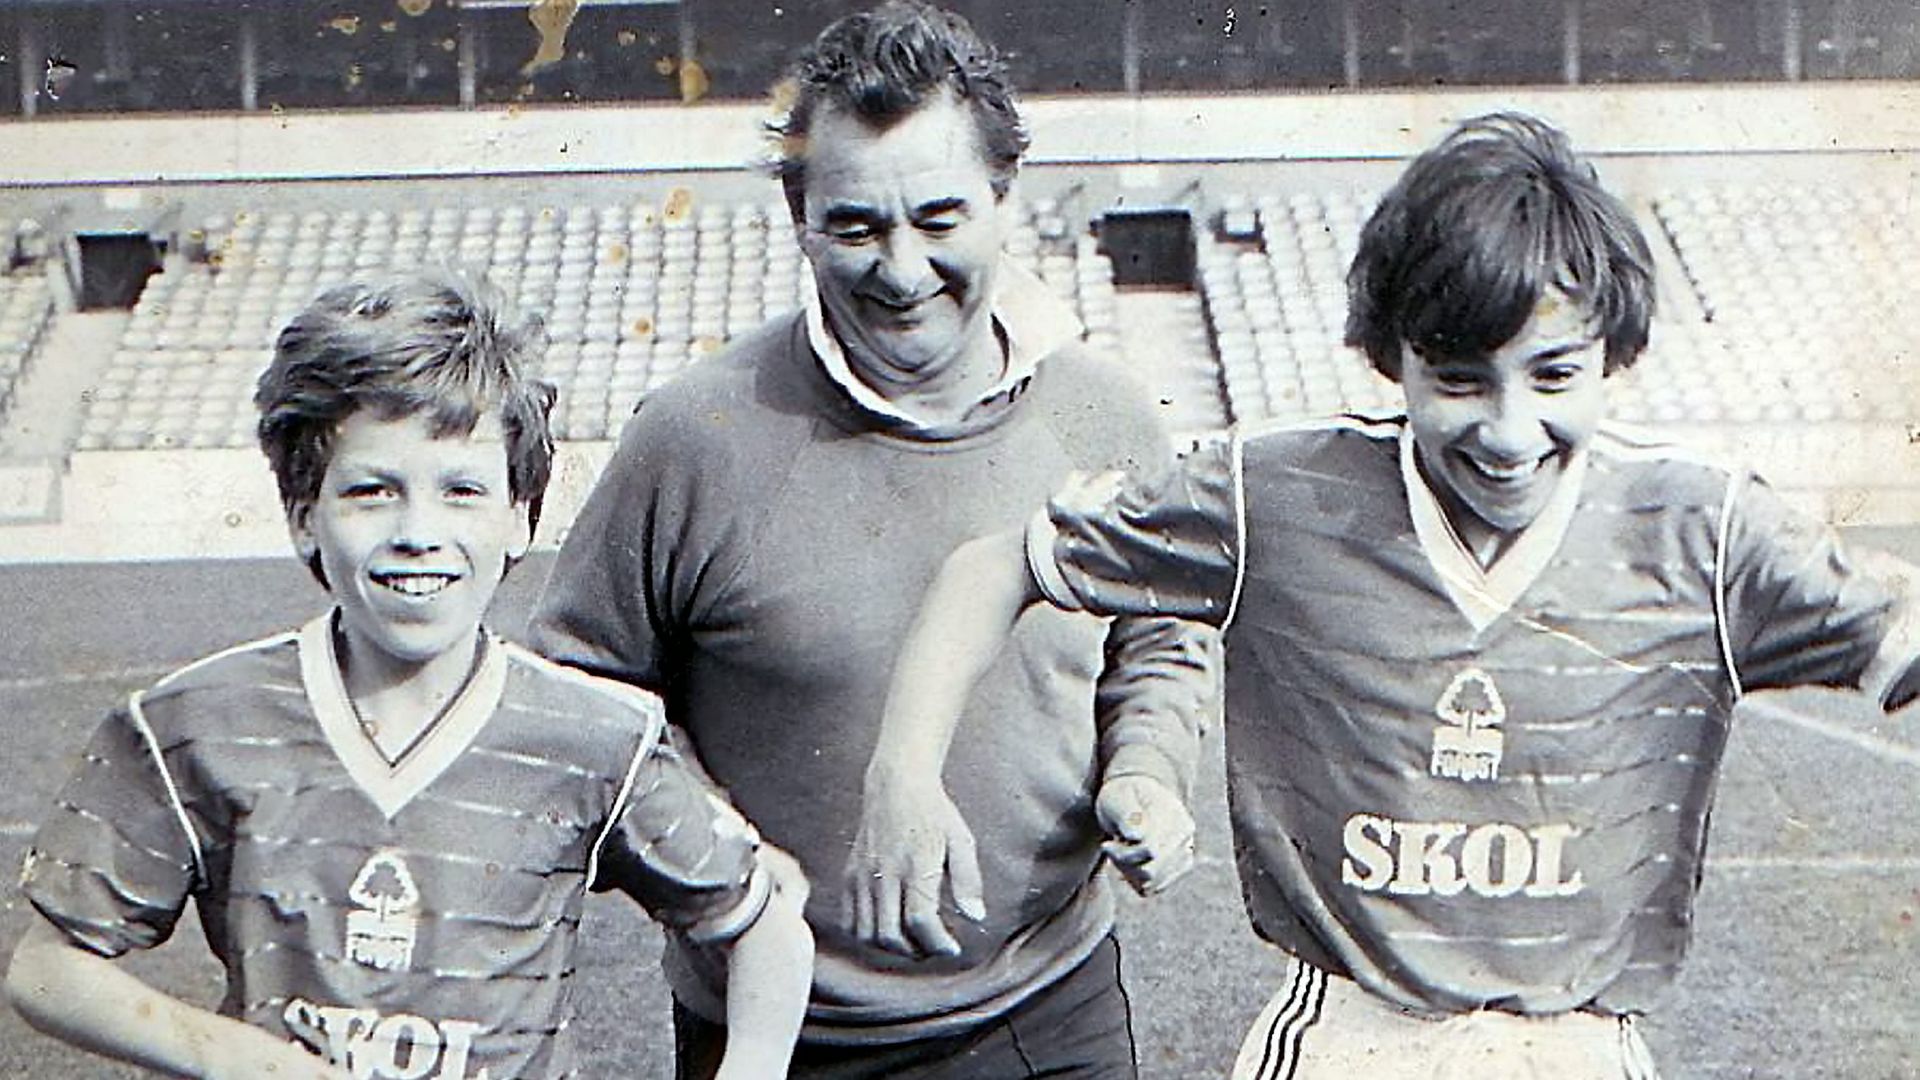 Growing up with Brian Clough